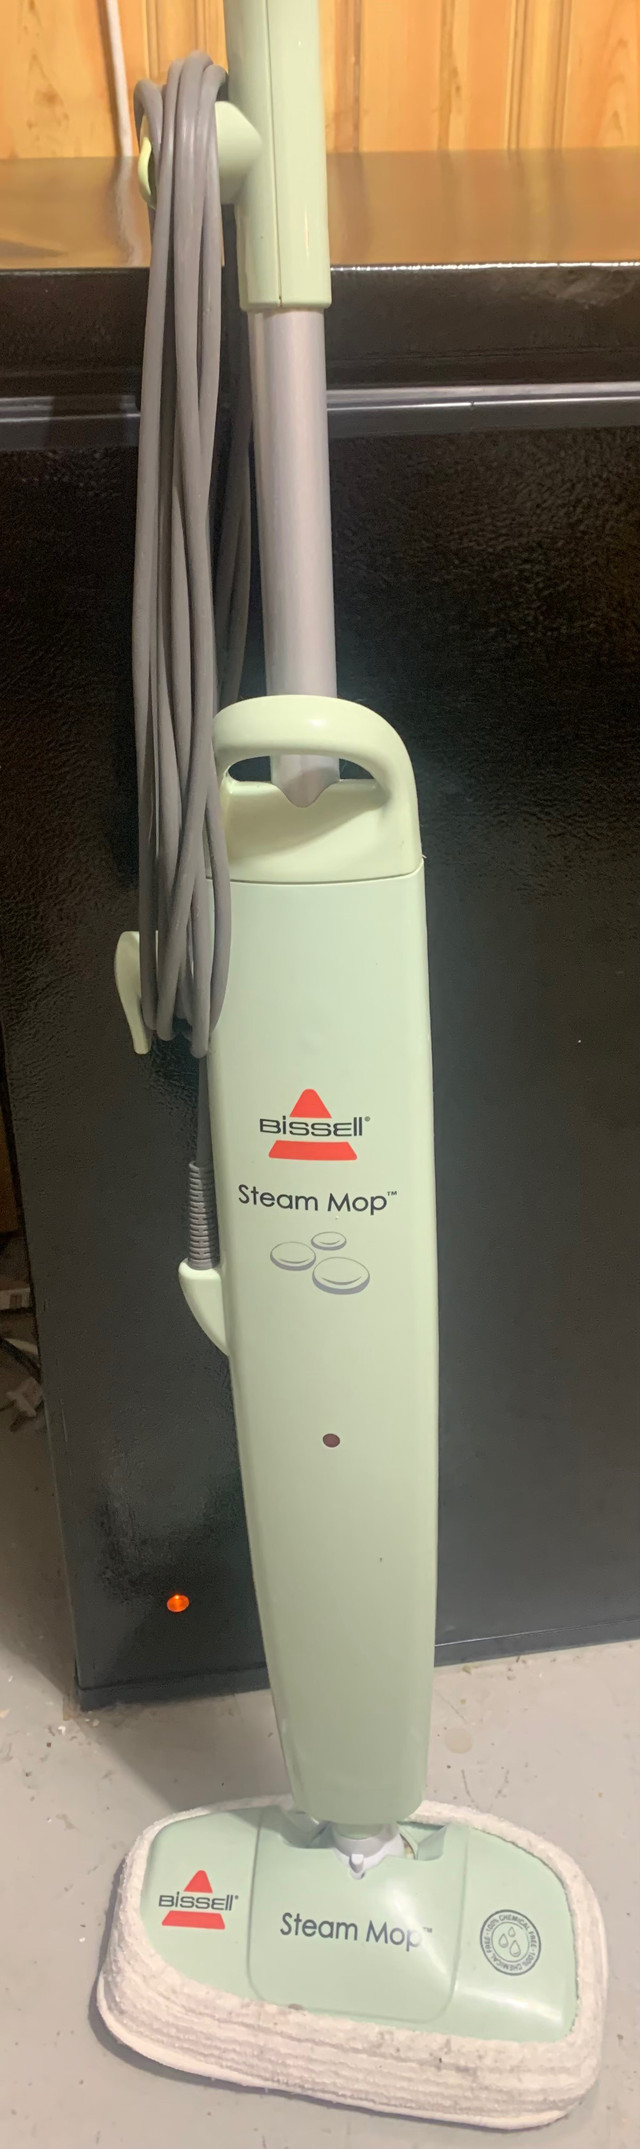 Bissel steam mop with washable cloth in Vacuums in Edmonton